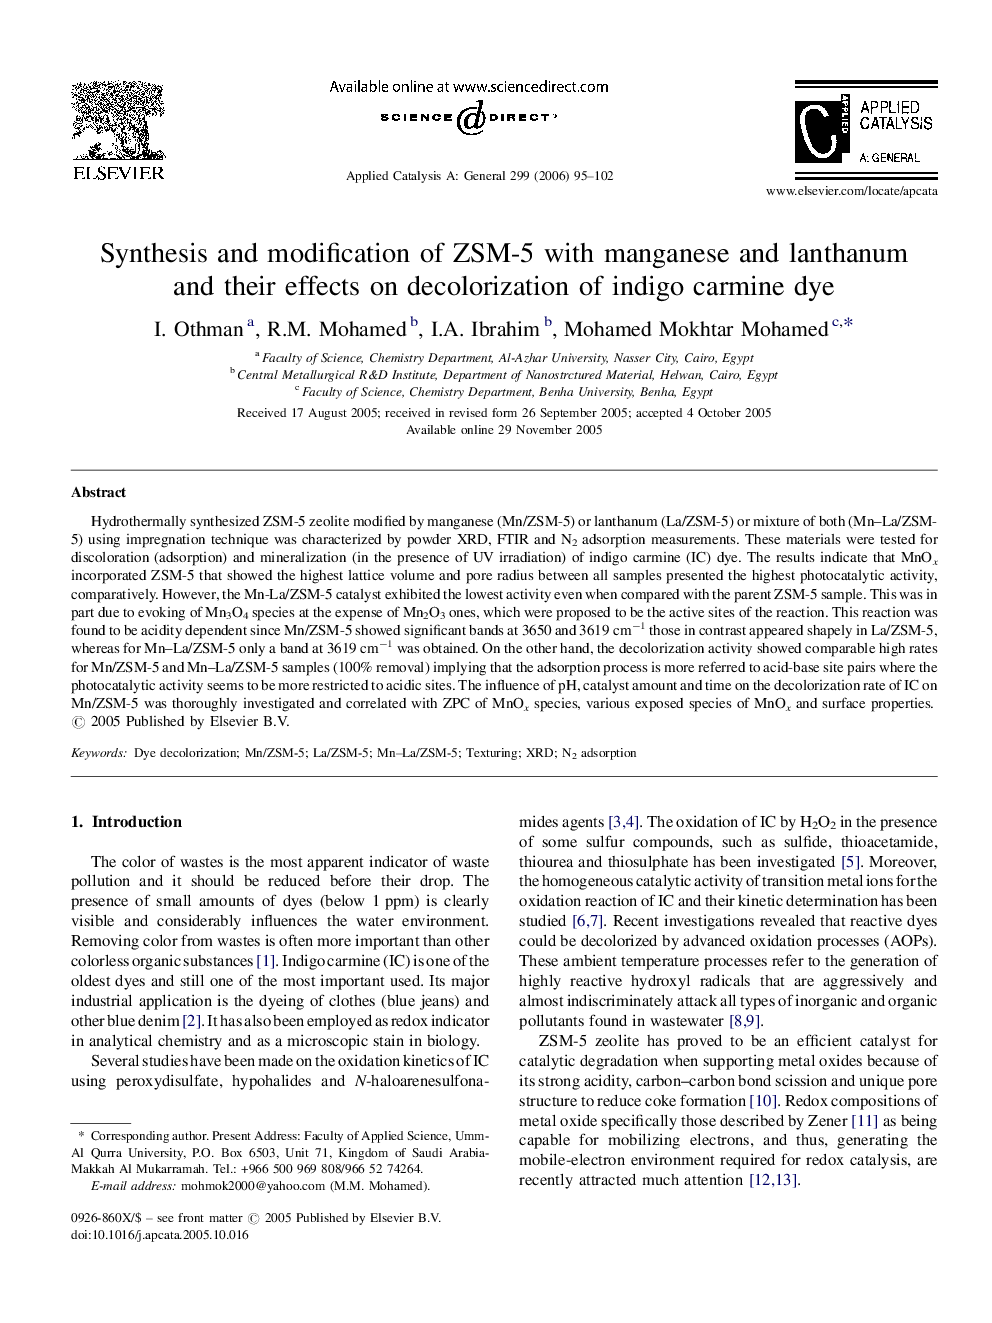 Synthesis and modification of ZSM-5 with manganese and lanthanum and their effects on decolorization of indigo carmine dye